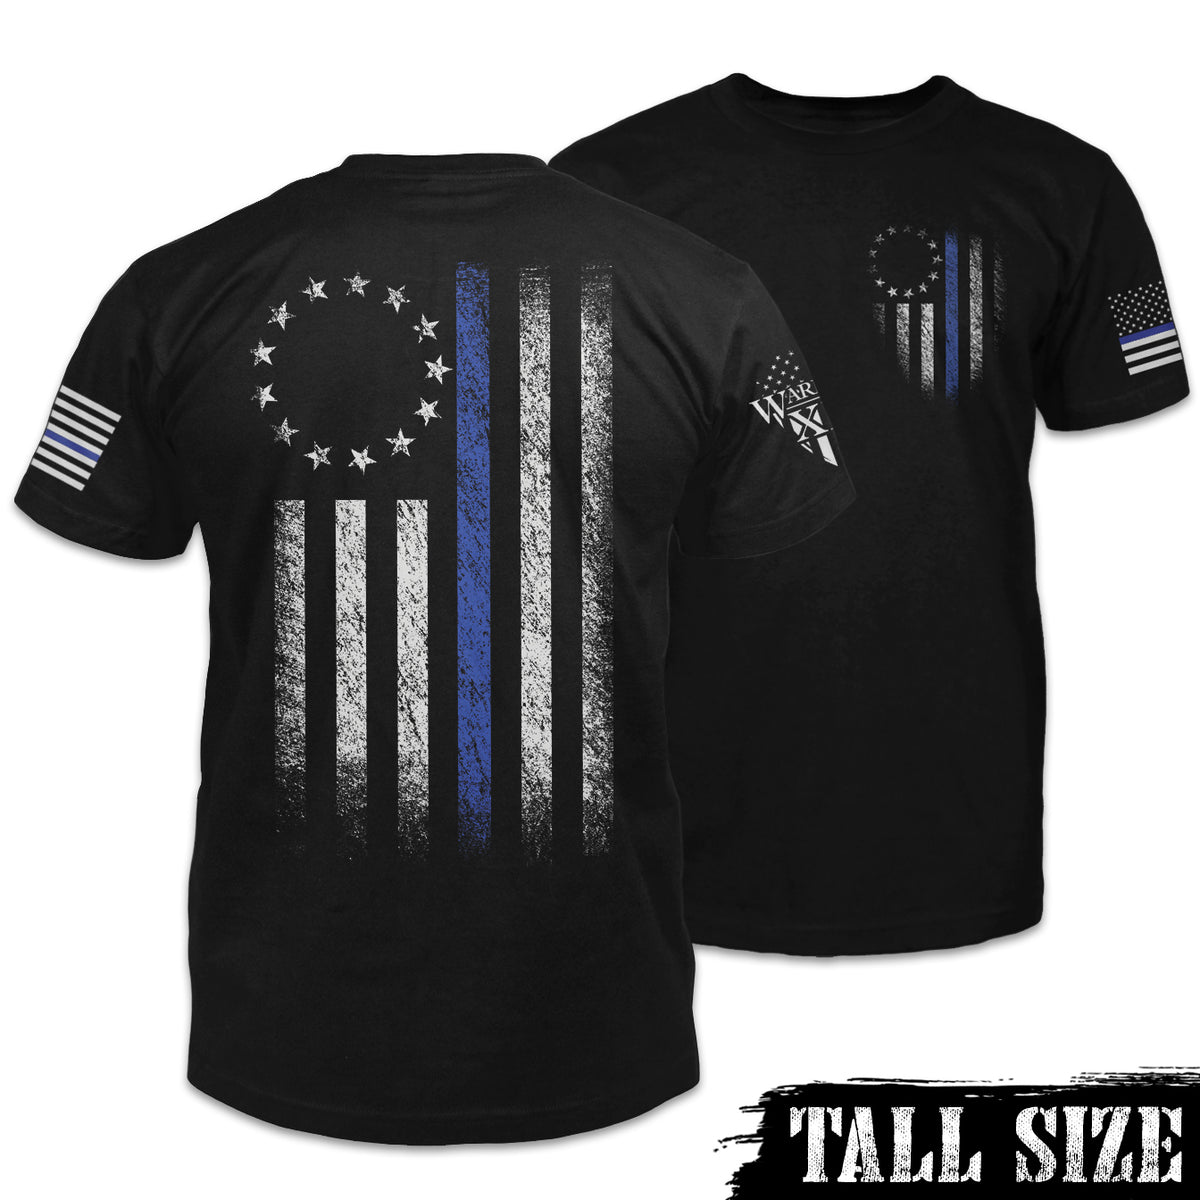 Front & back black tall size shirt that features a thin blue line Betsy Ross flag on a back print to show that we remain undeterred in our support for American law enforcement. printed on the shirt.